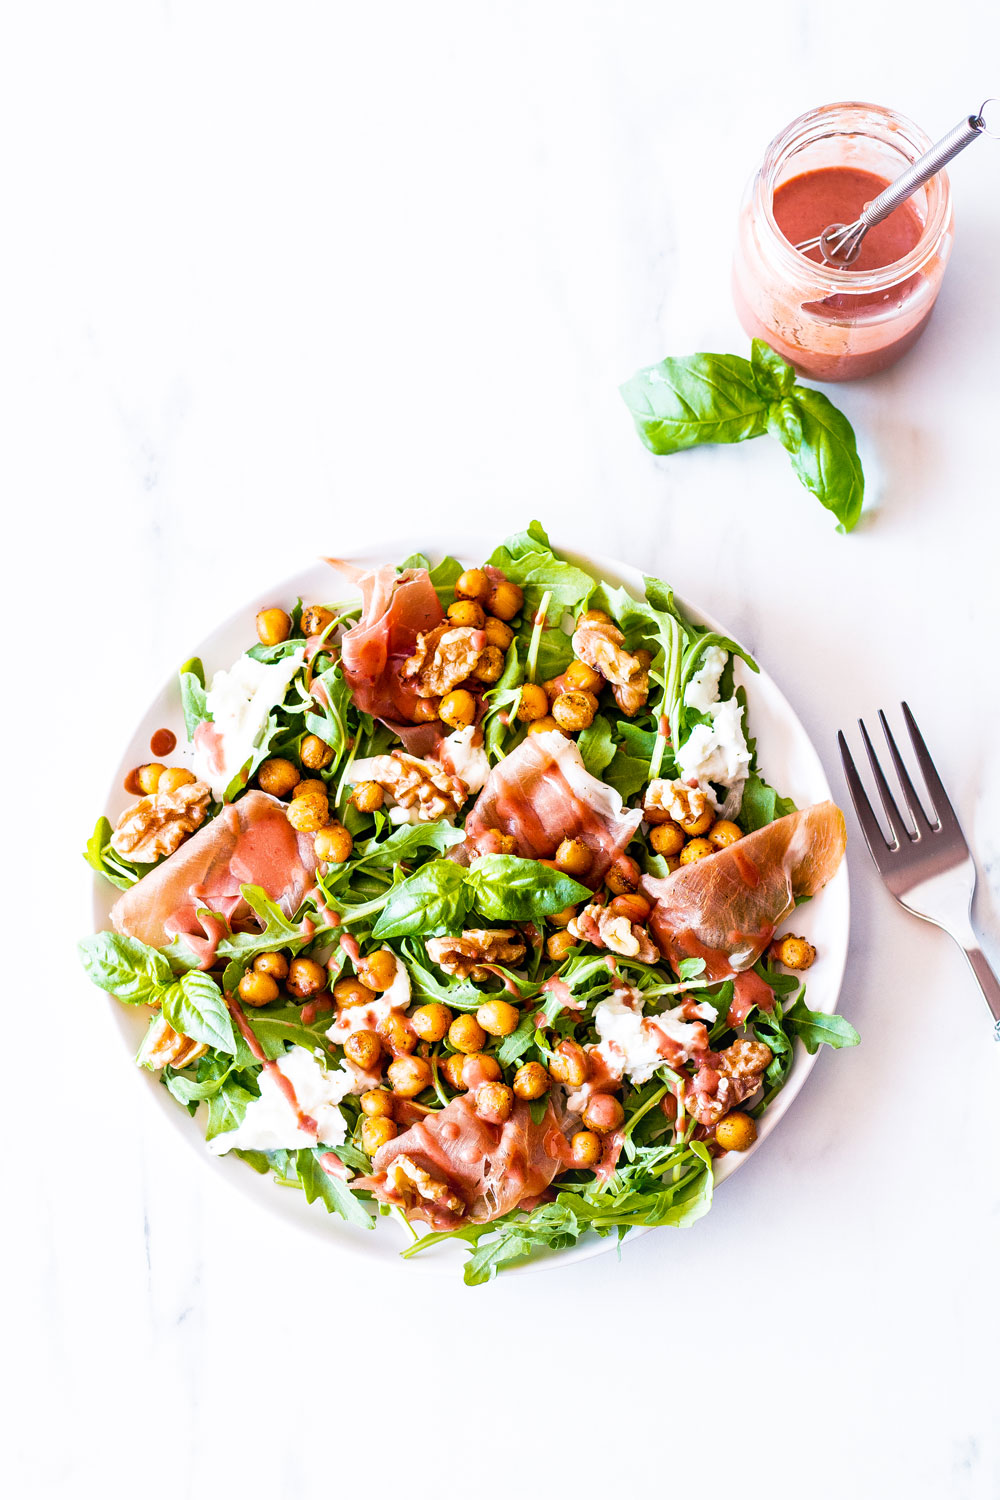 For a festive end-of-summer salad, try this prosciutto, mozzarella, and spicy chickpea salad with strawberry vinaigrette. This recipe is loaded with good quality Italian prosciutto and served with a fragrant sweet and sour salad dressing. https://www.spotebi.com/recipes/prosciutto-mozzarella-spicy-chickpea-salad-strawberry-vinaigrette/